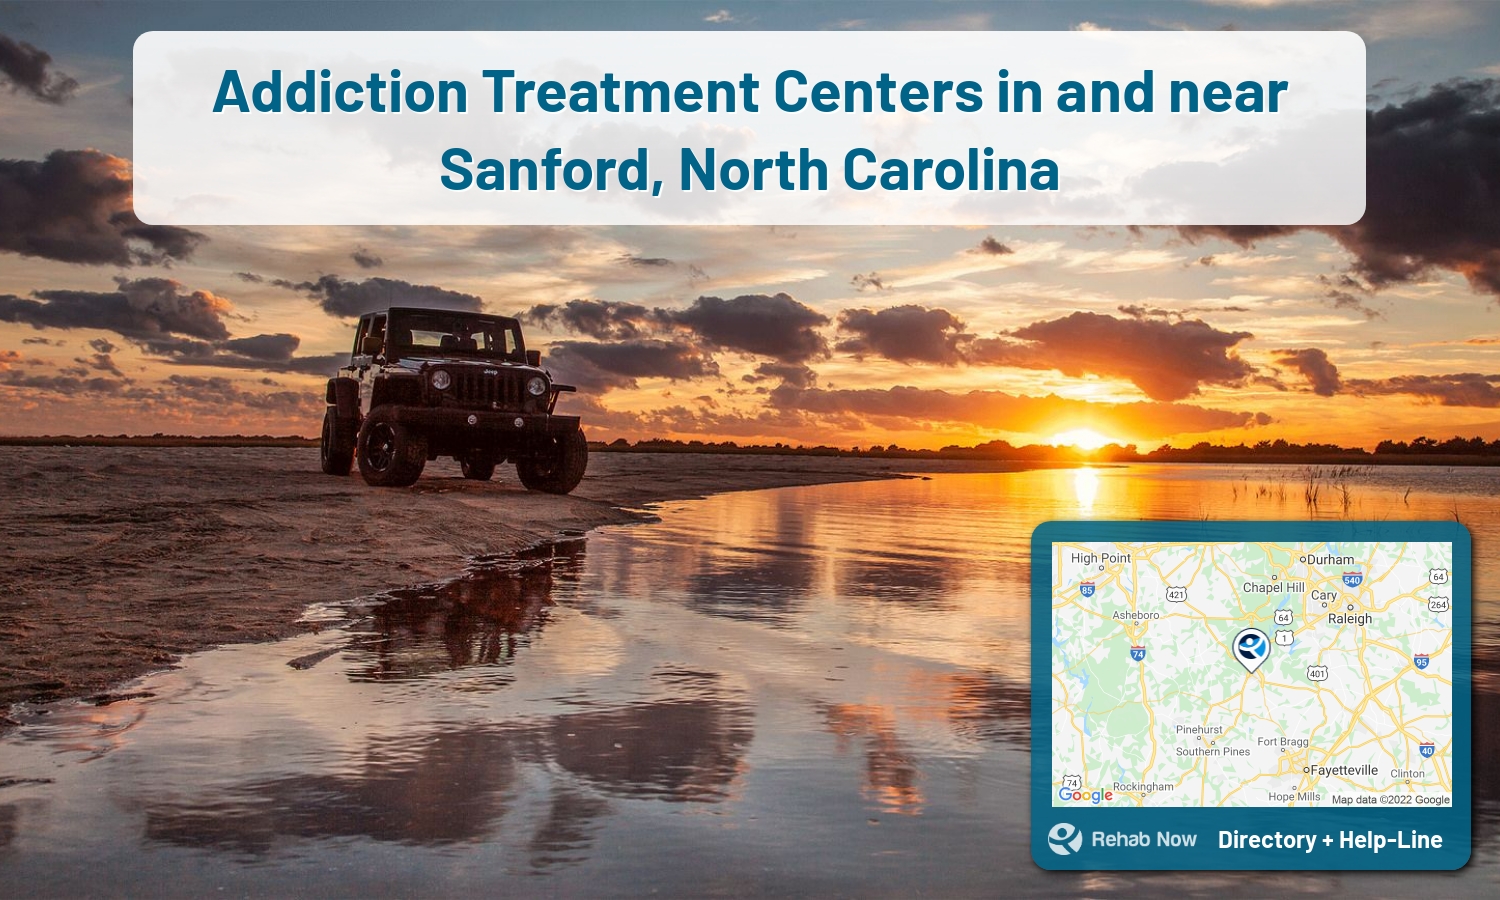 Our experts can help you find treatment now in Sanford, North Carolina. We list drug rehab and alcohol centers in North Carolina.